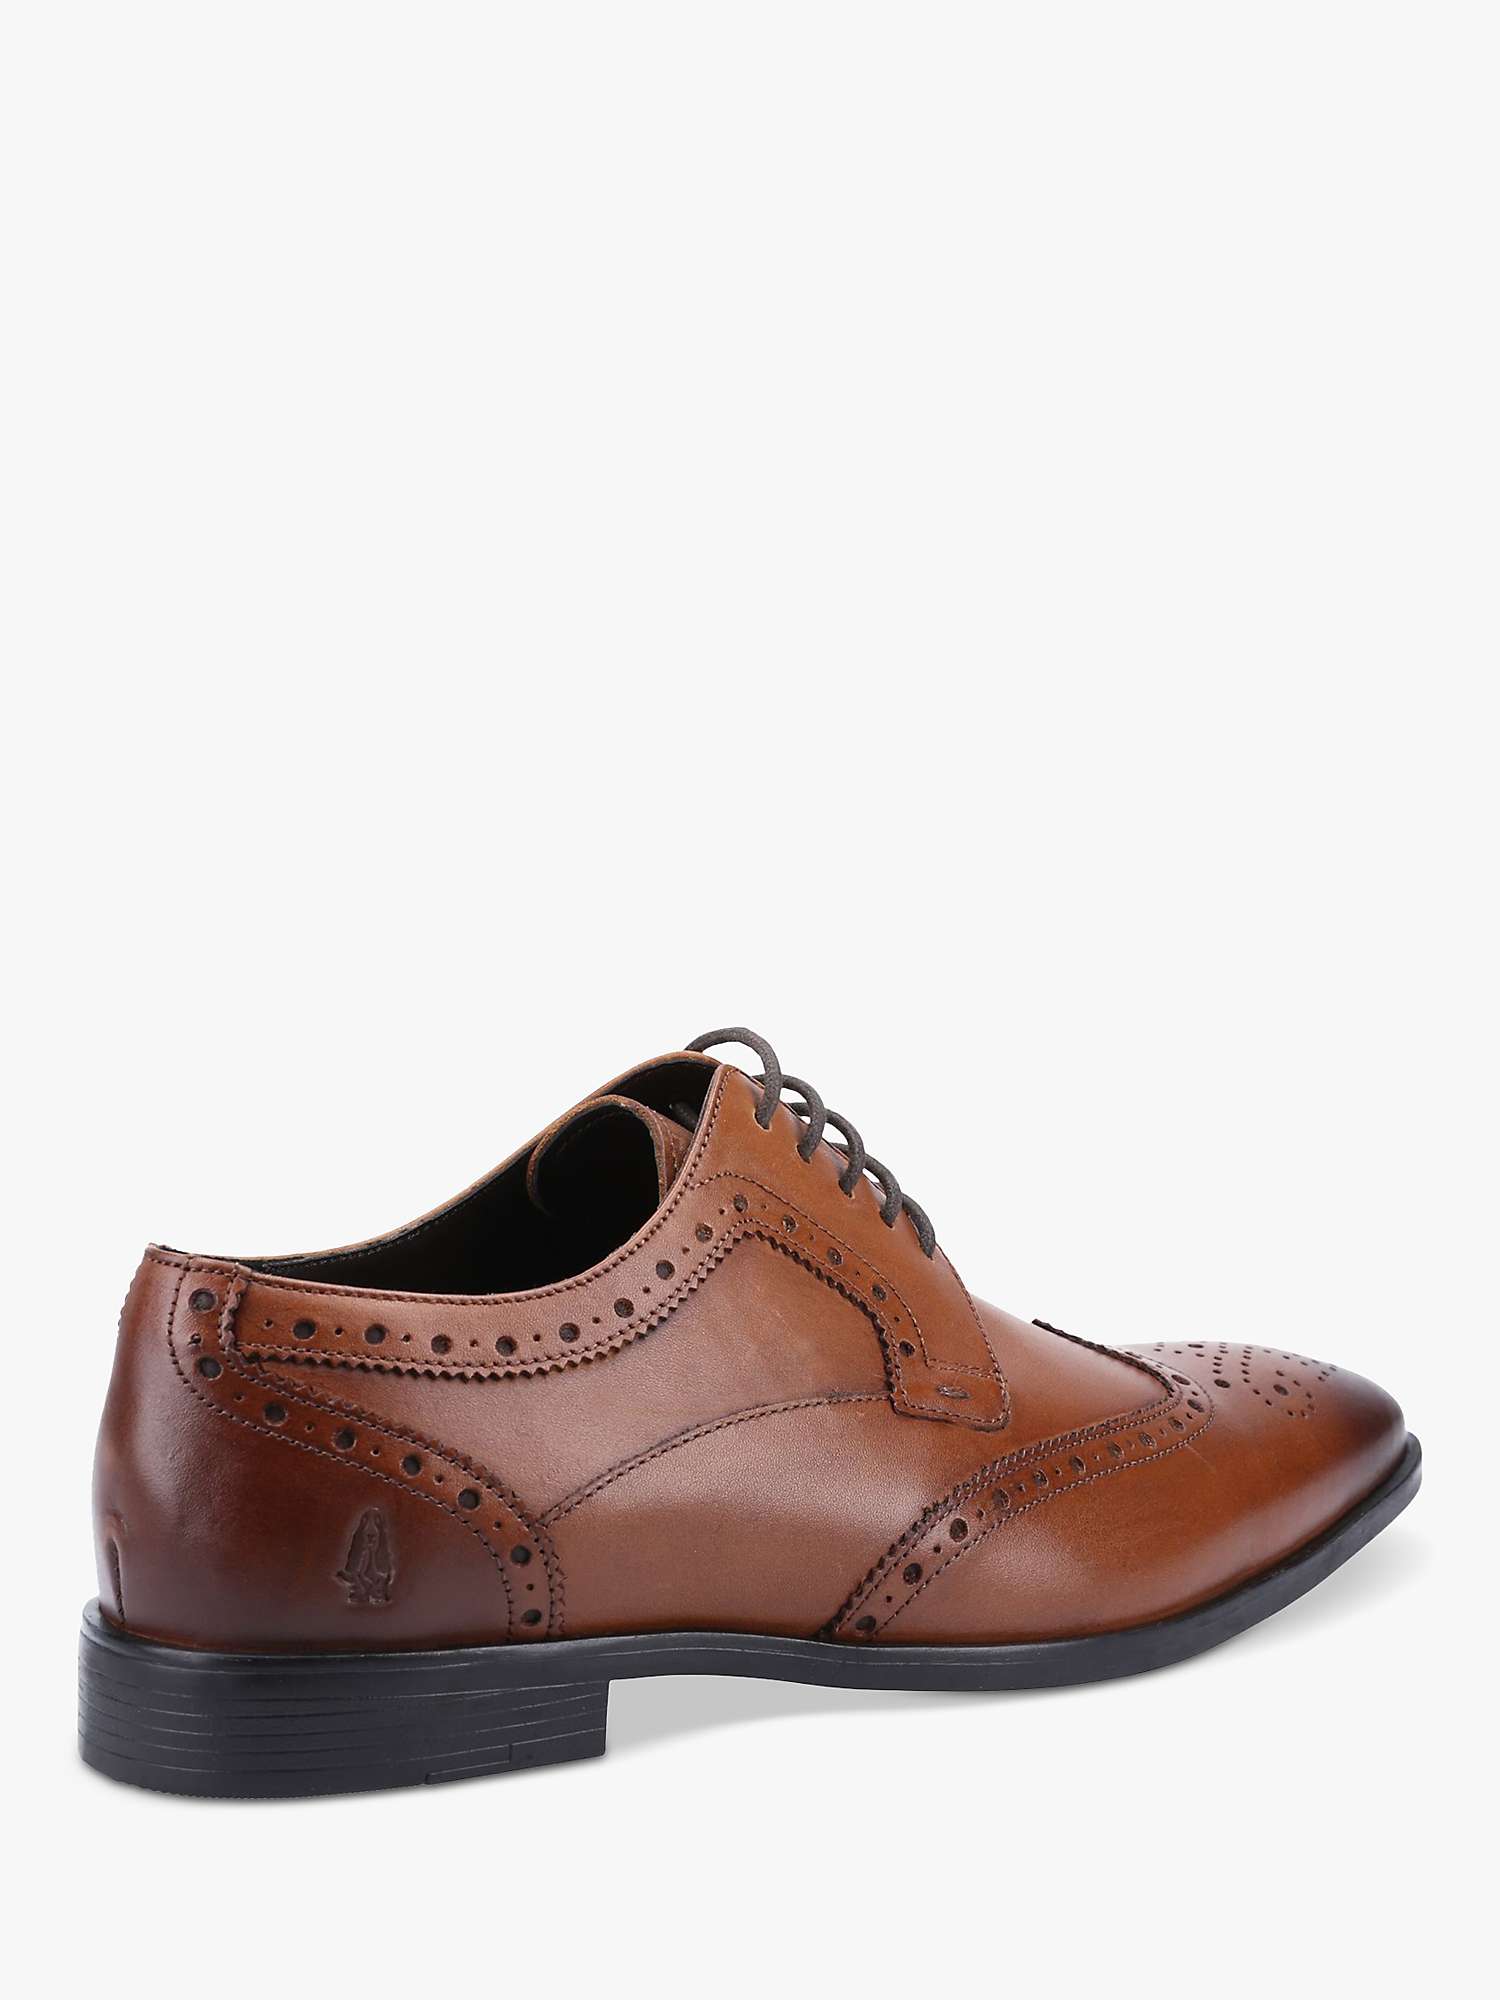 Buy Hush Puppies Elliot Brogue Leather Shoes Online at johnlewis.com